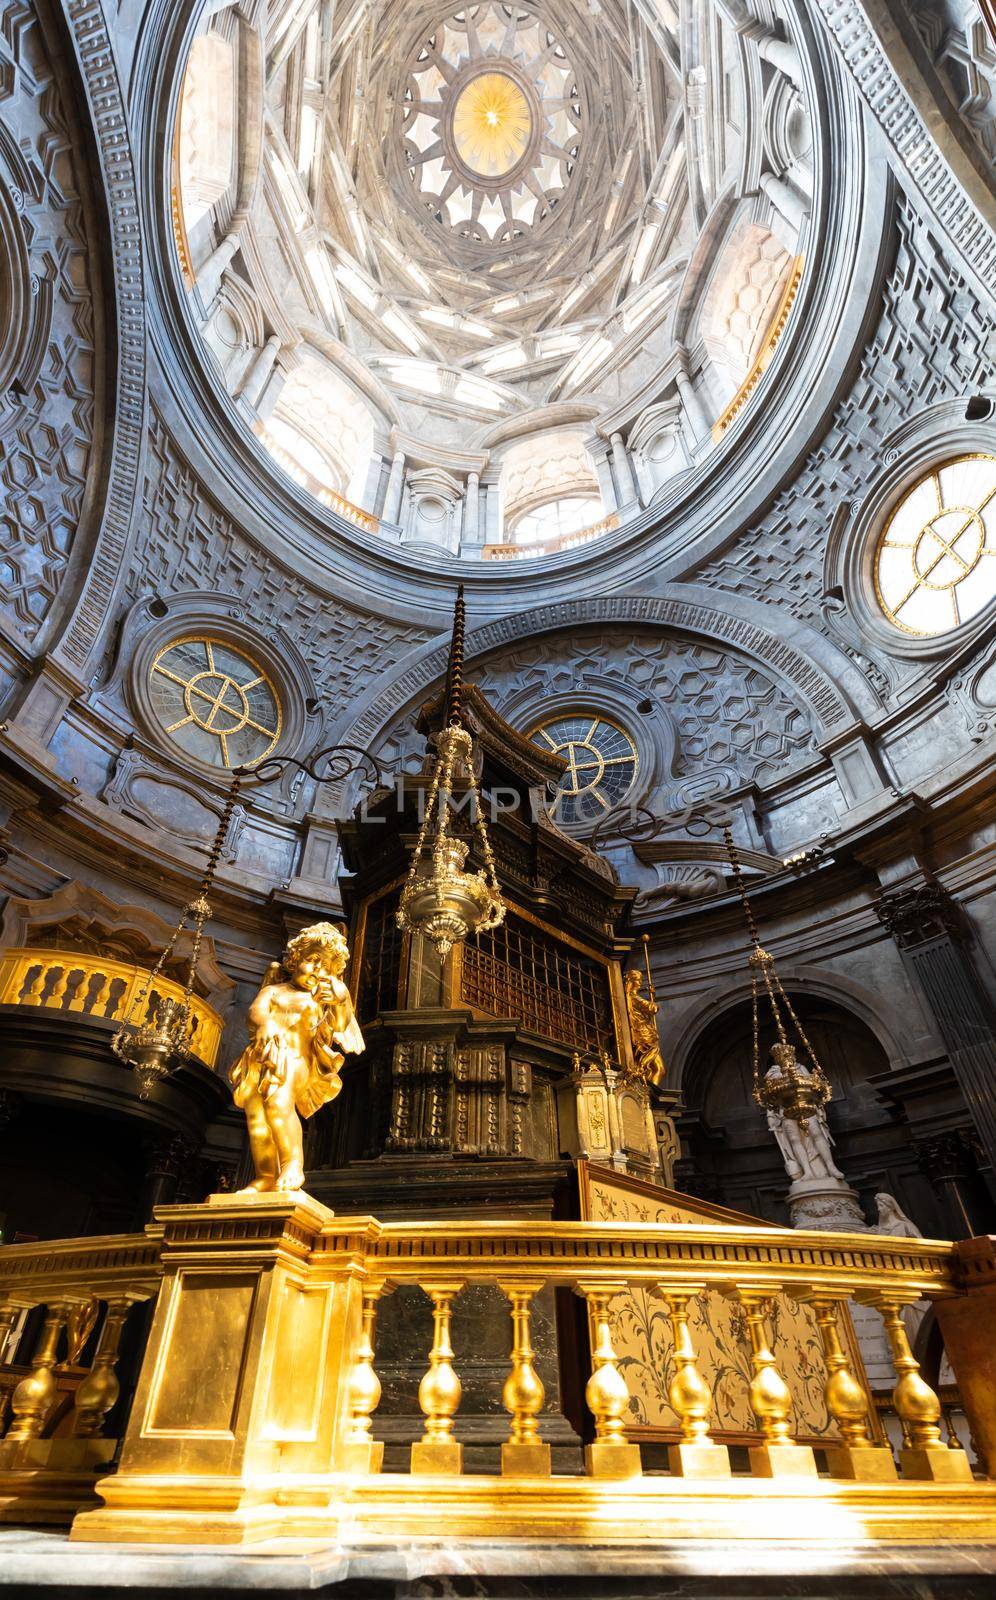 Turin, Italy - Circa August 2021: the Chapel of the Shroud, 1694 by Guarini. One of the most important holy locations for Christian religion